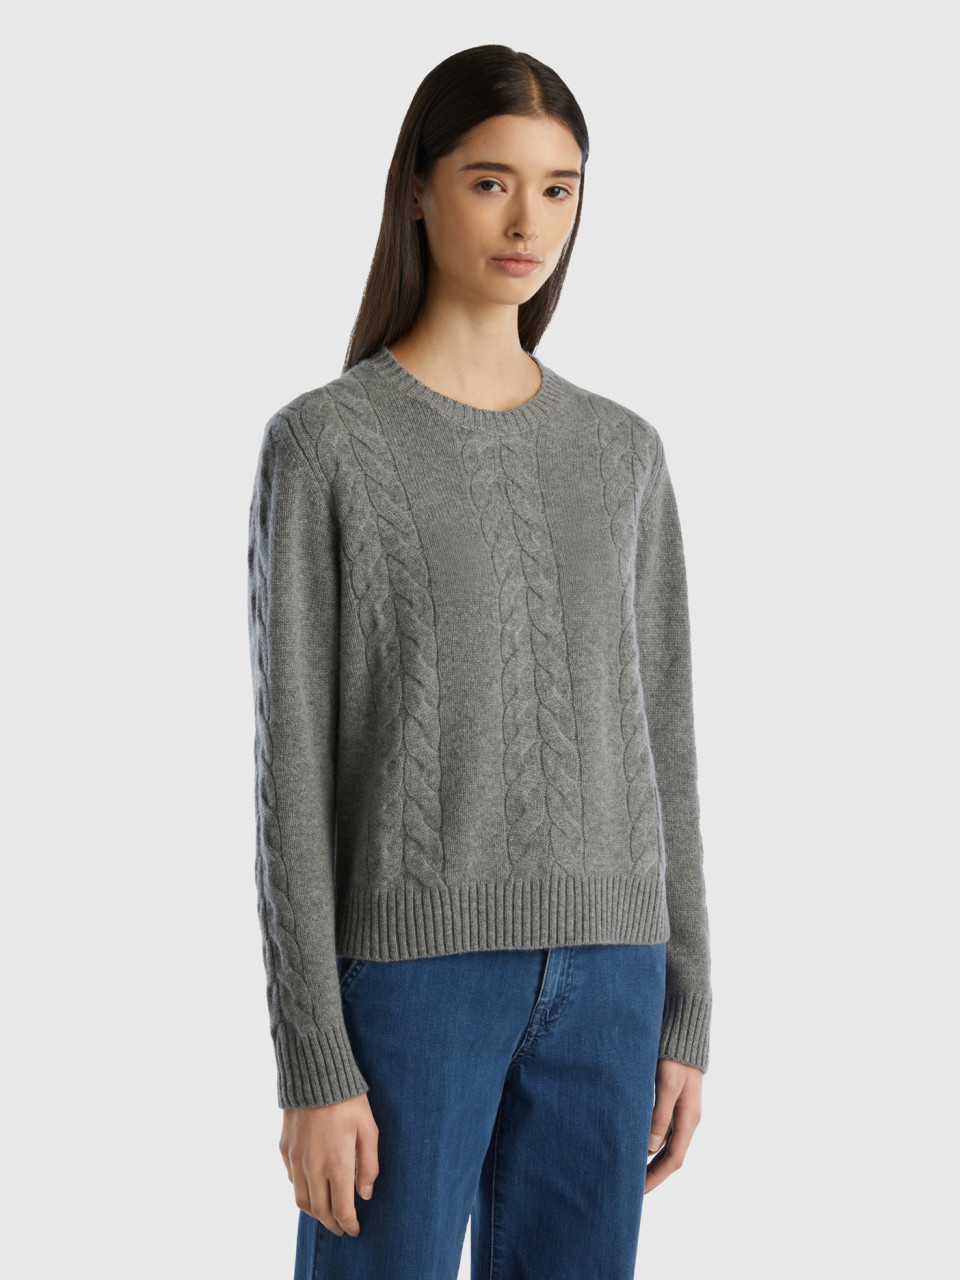 Benetton, Cable Knit Sweater In Pure Cashmere, Dark Gray, Women